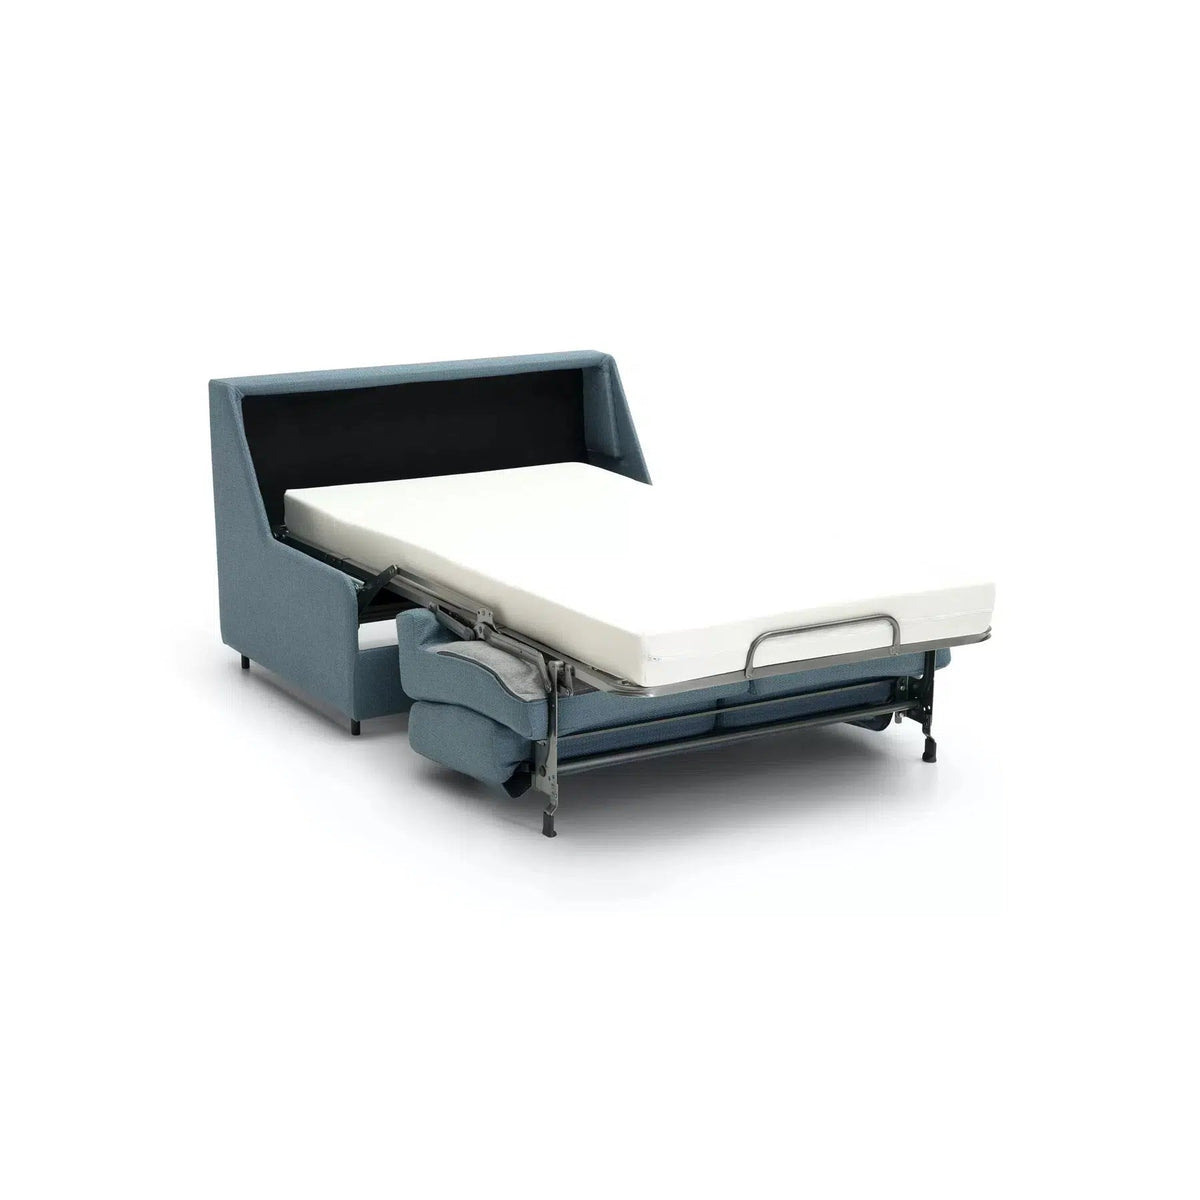 Waka 961 Sofa Bed-TM Leader-Contract Furniture Store